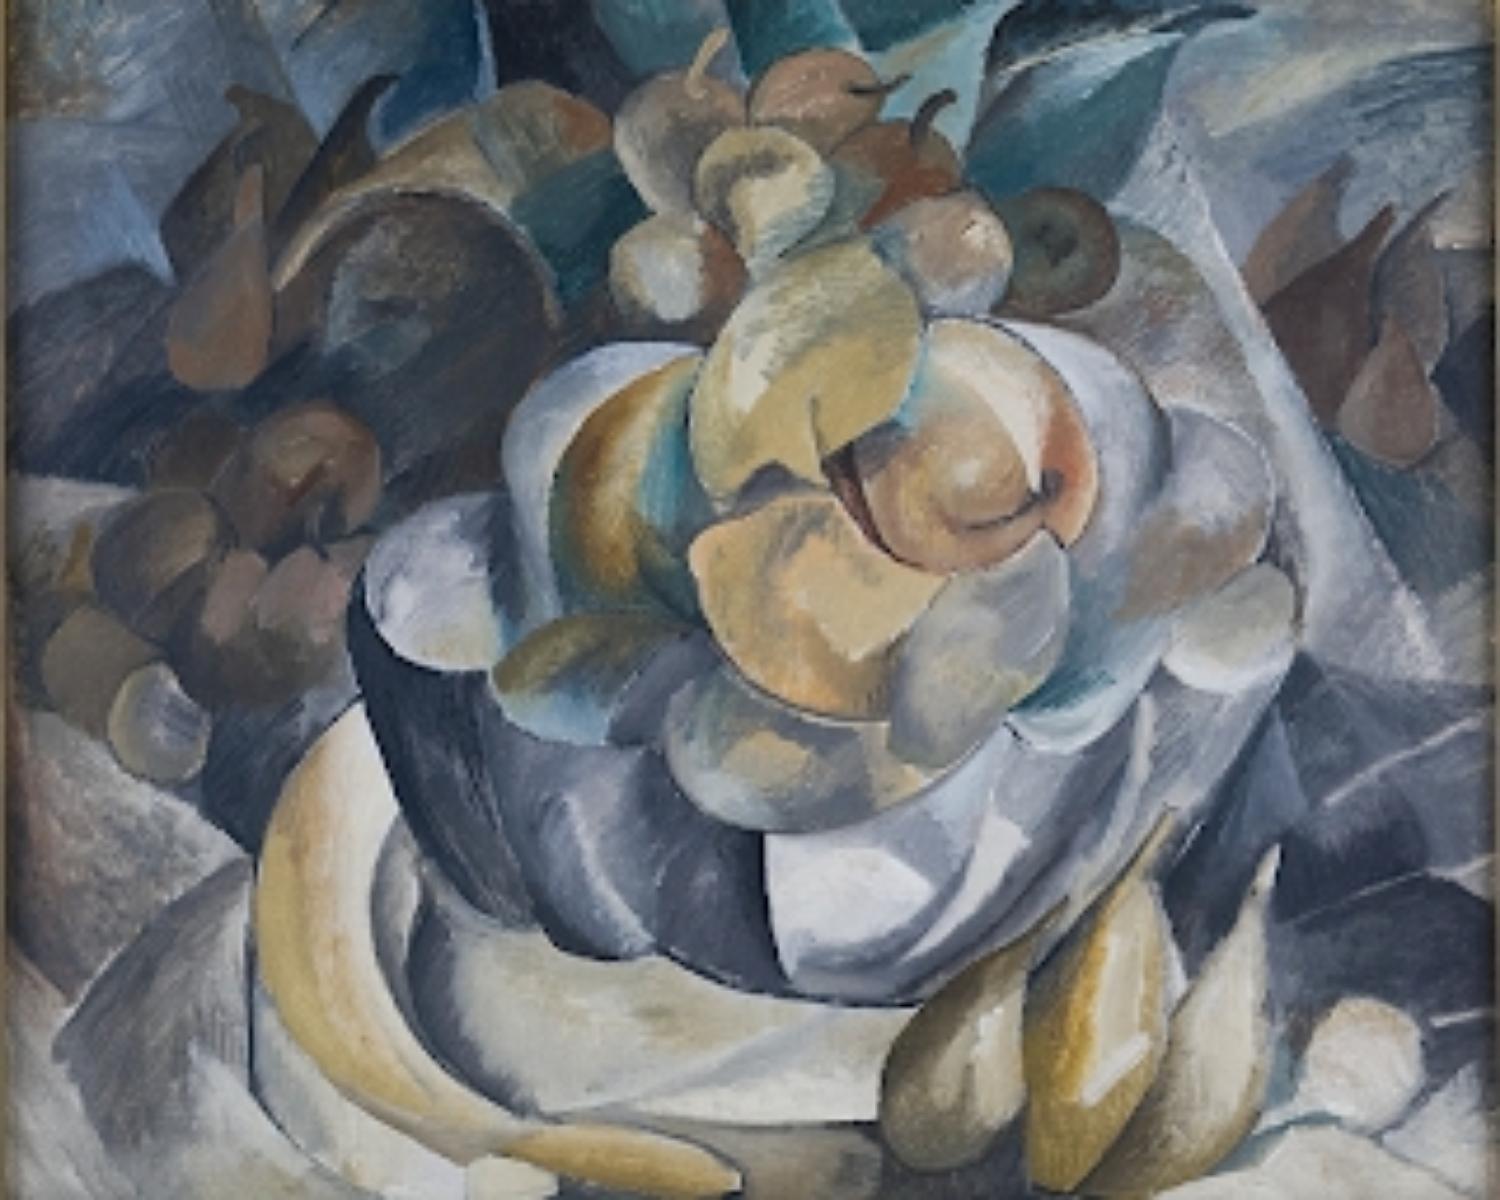 Early Cubism (1907-1910)